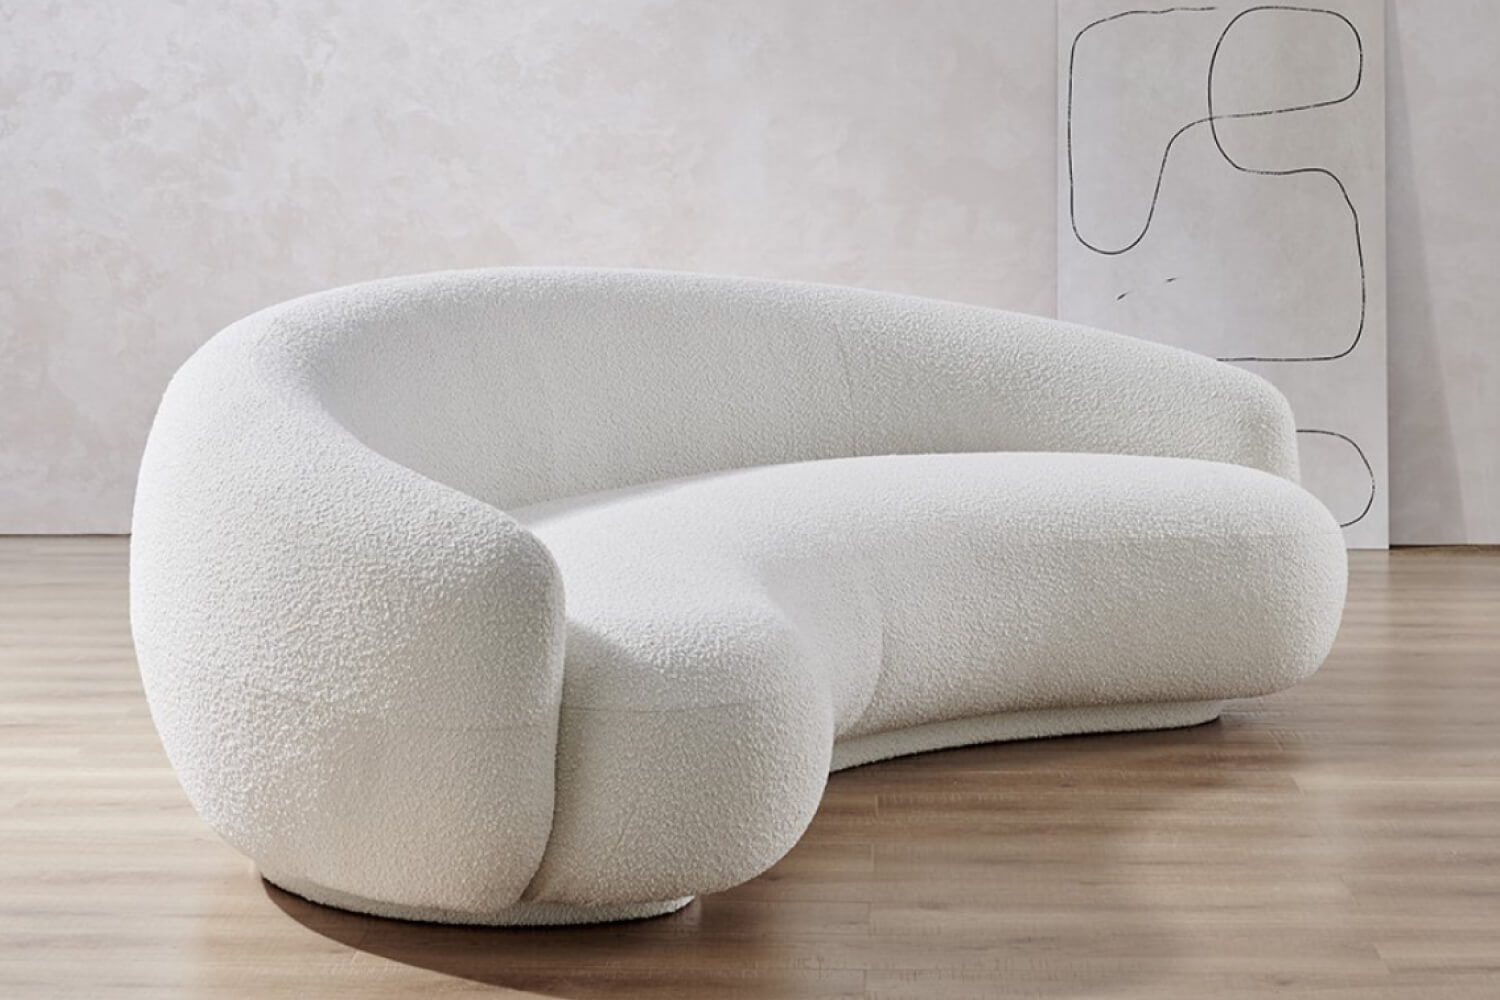 A Savelle Modern Curved Sofa with a white fabric featuring a flowing, organic shape that creates an inviting and plush seating area, set in a room with a light wooden floor and abstract wall art.